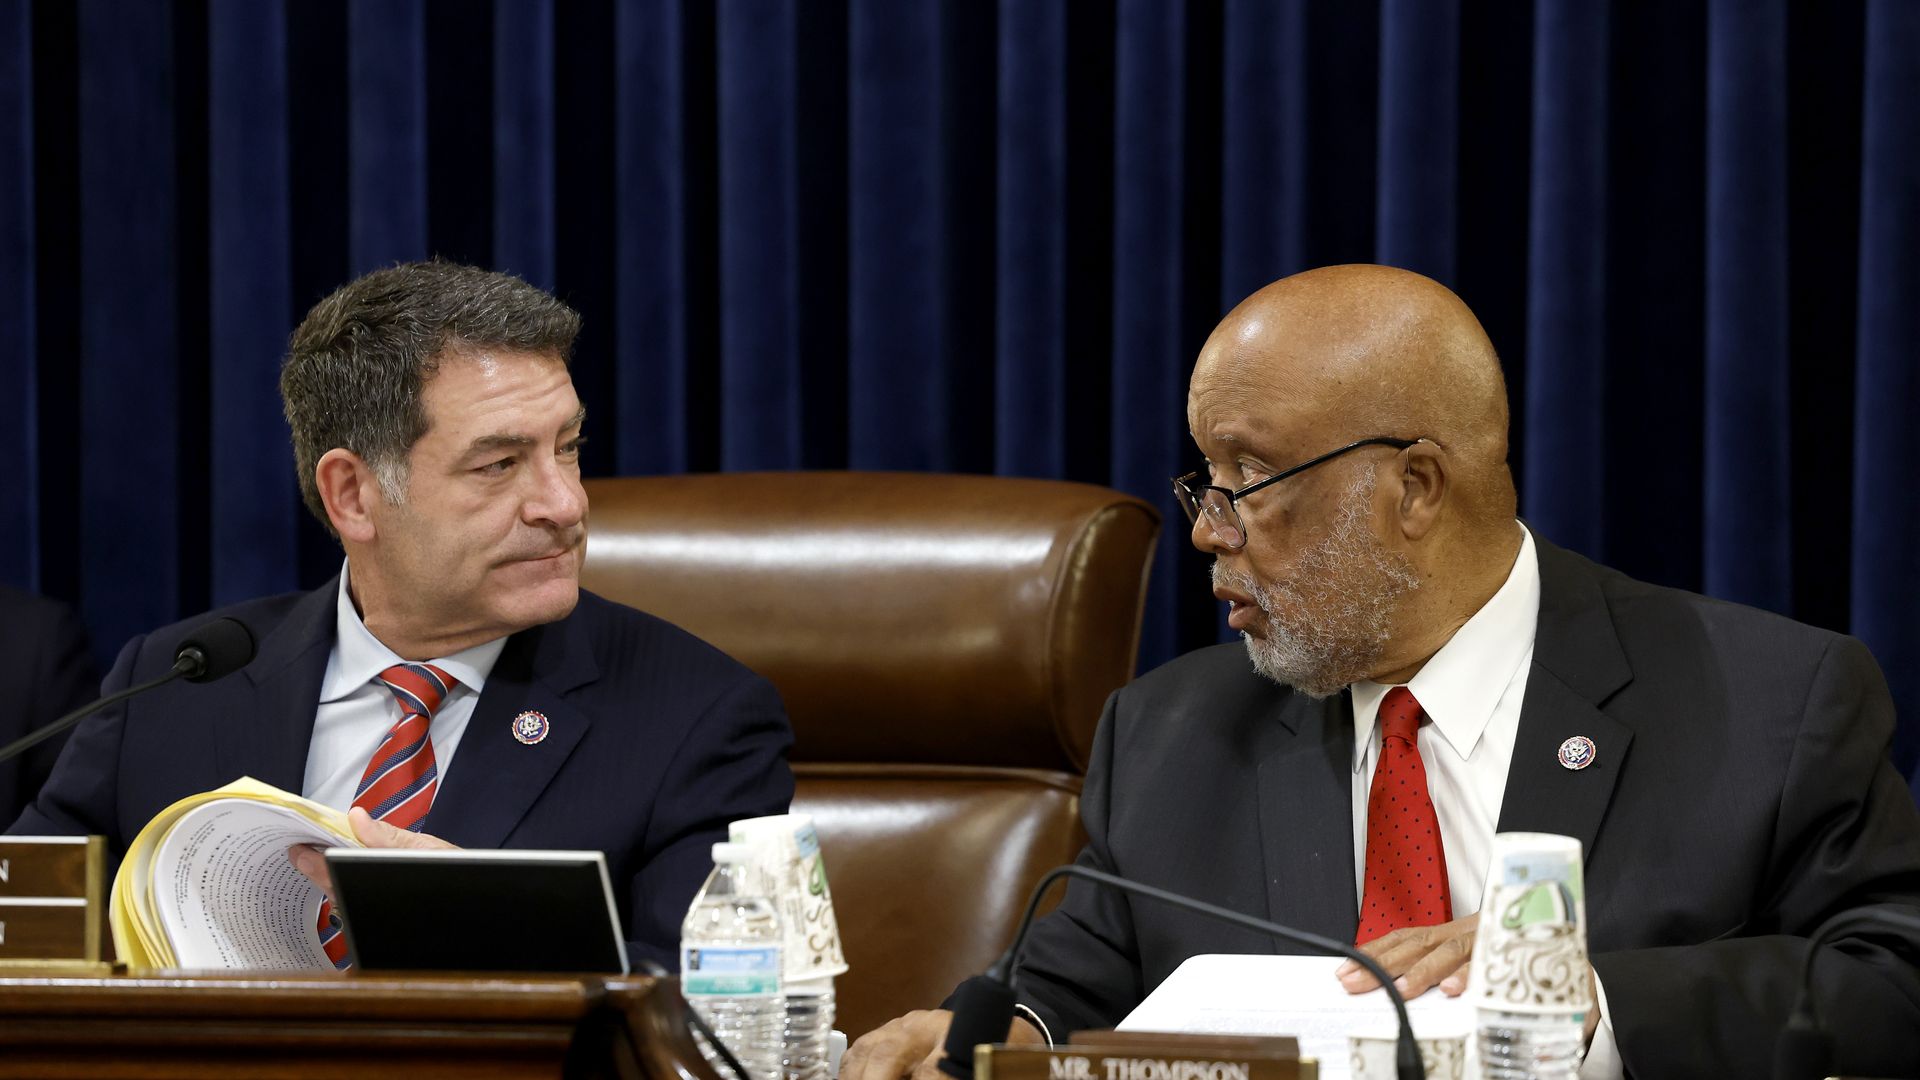 Committee chairman Rep. Mark Green (R-TN) and ranking member Rep. Bennie Thompson (D-MS) speak to one another during a hearing with the House Committee on Homeland Security 